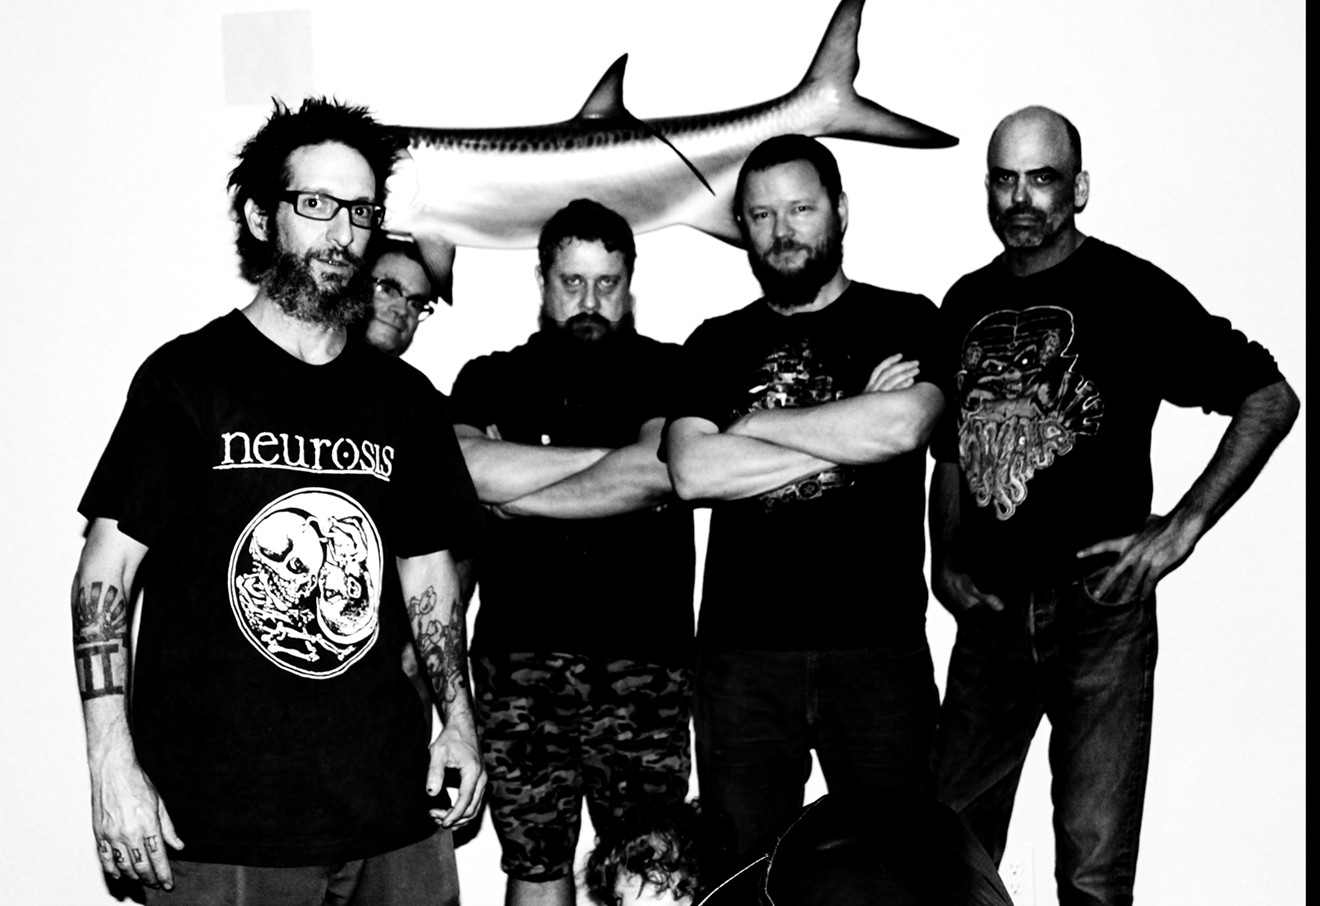 Brutal Juice reformed in 2012. Frontman Craig Welch is at far left and founder Gordon Gibson is second from right.